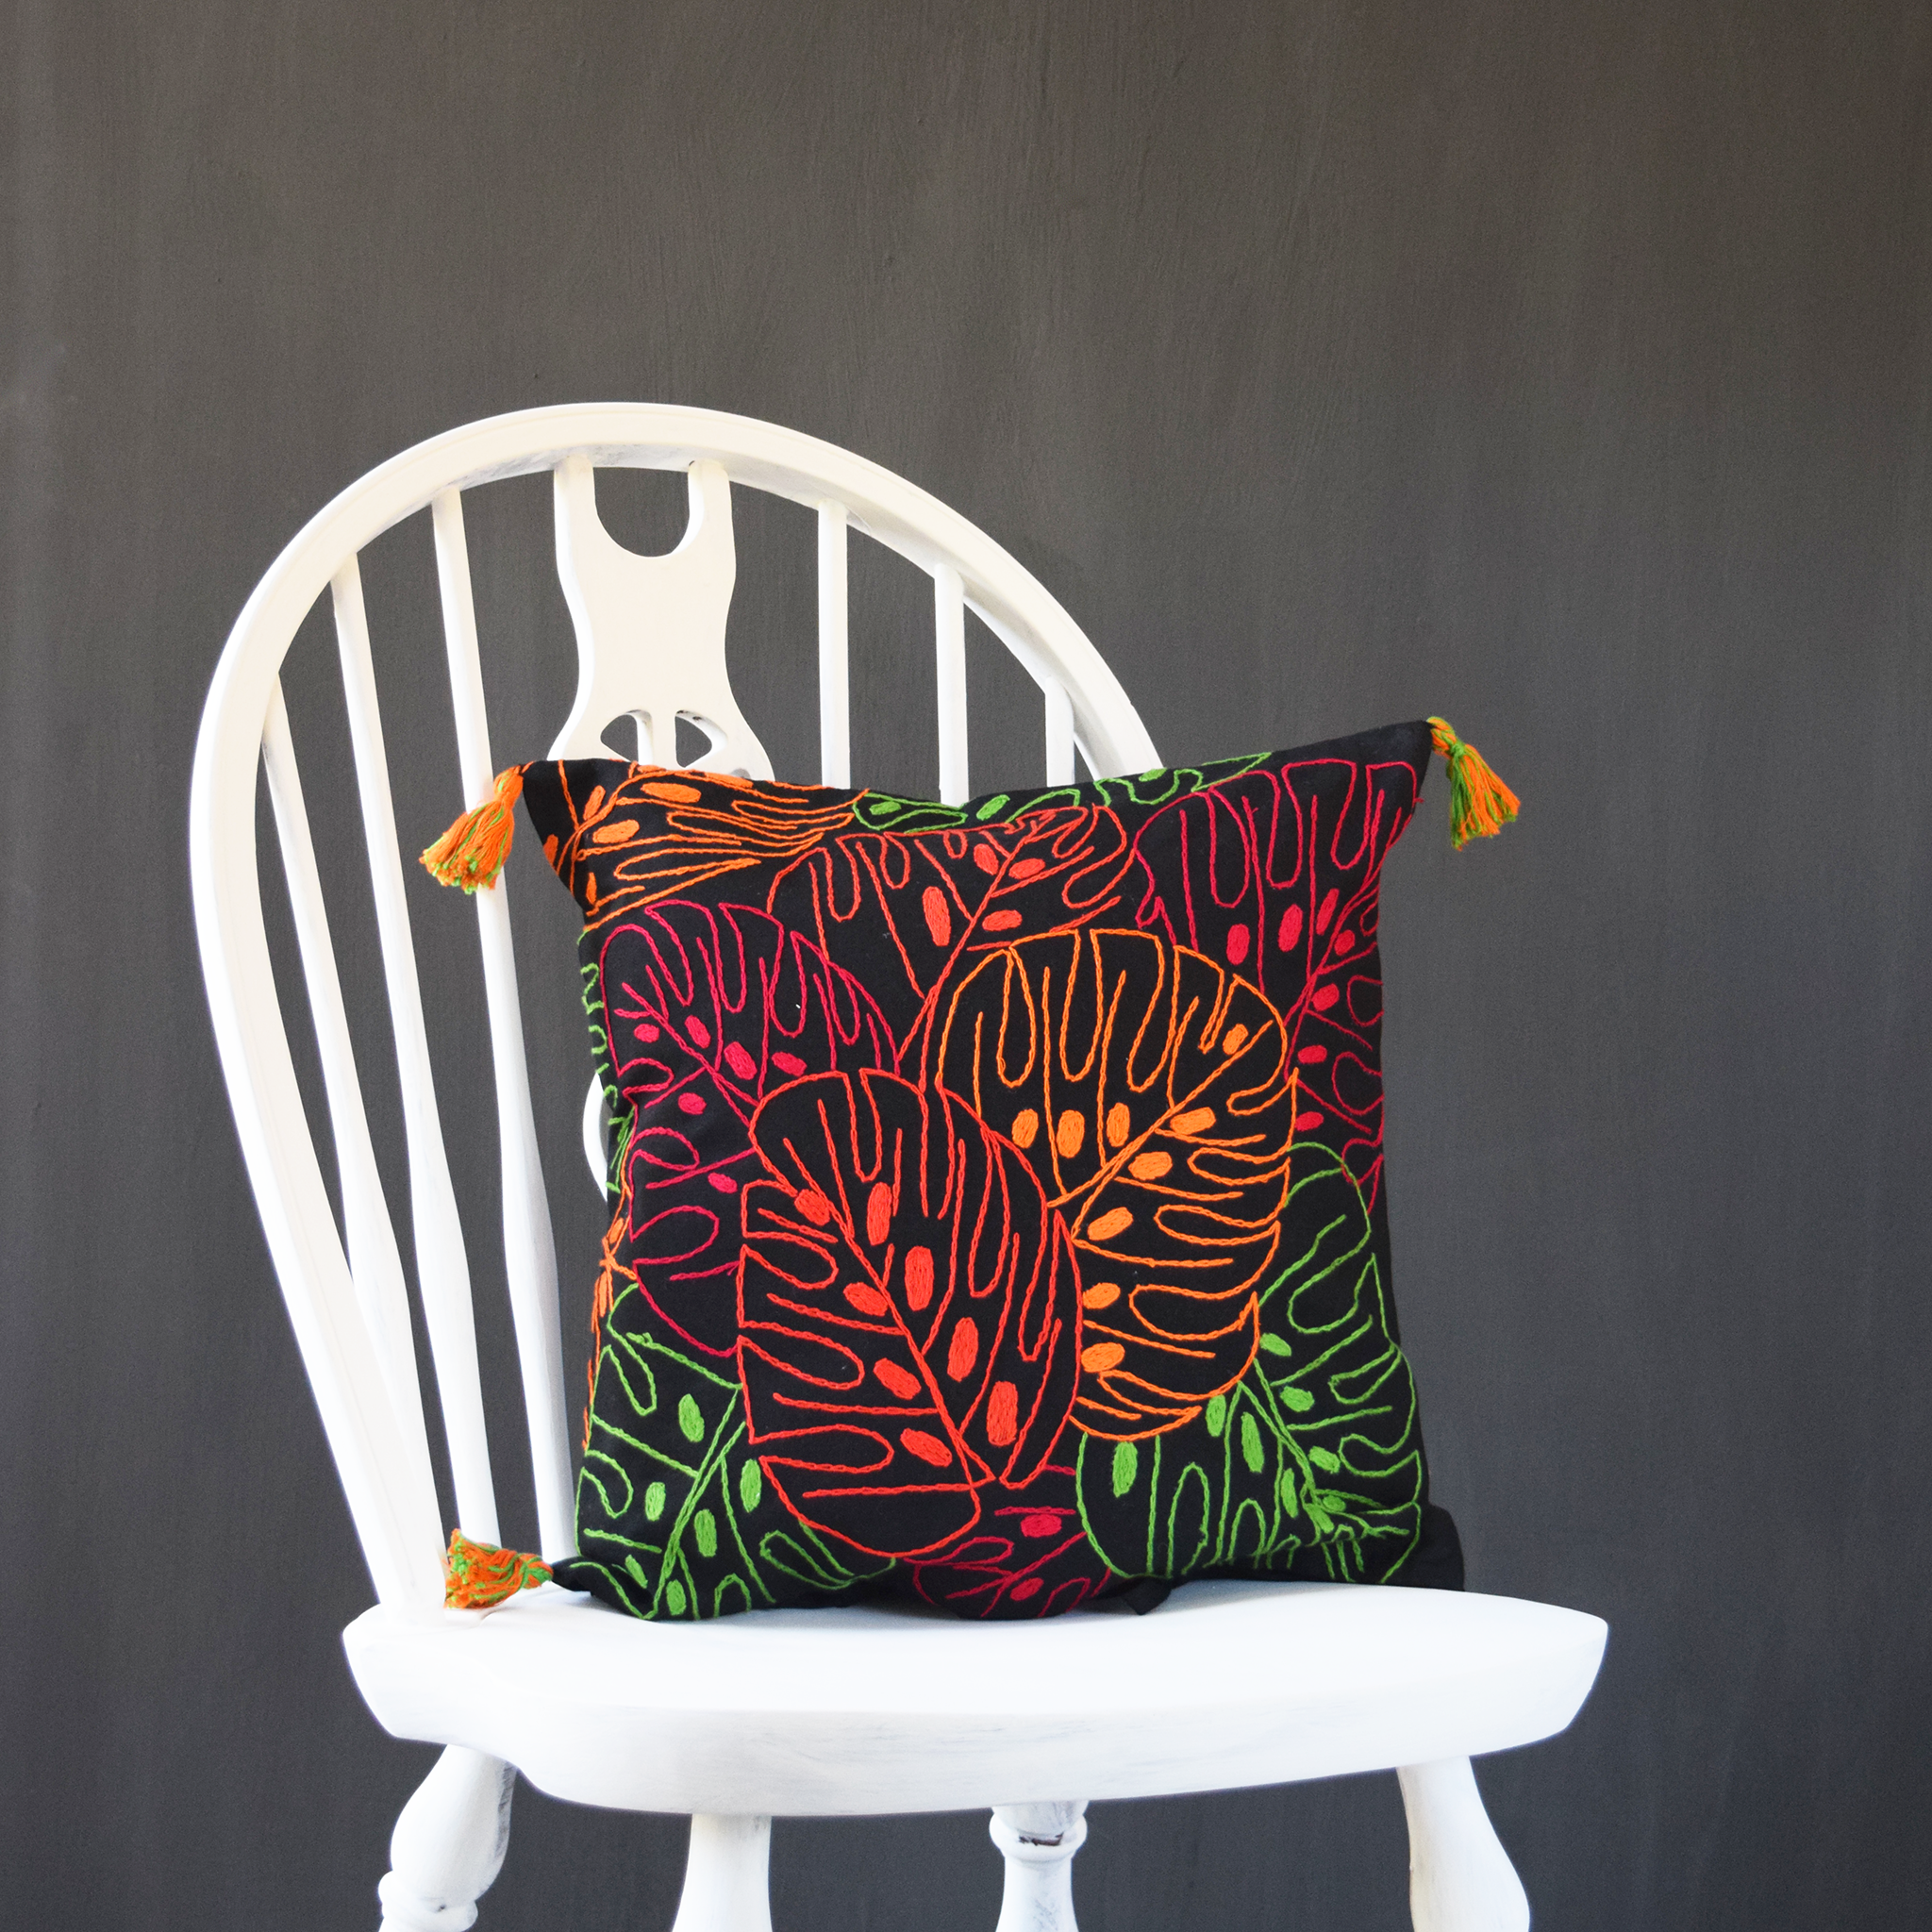 Autumn Leaves, Embroidered Cushion Cover 16" x 16"